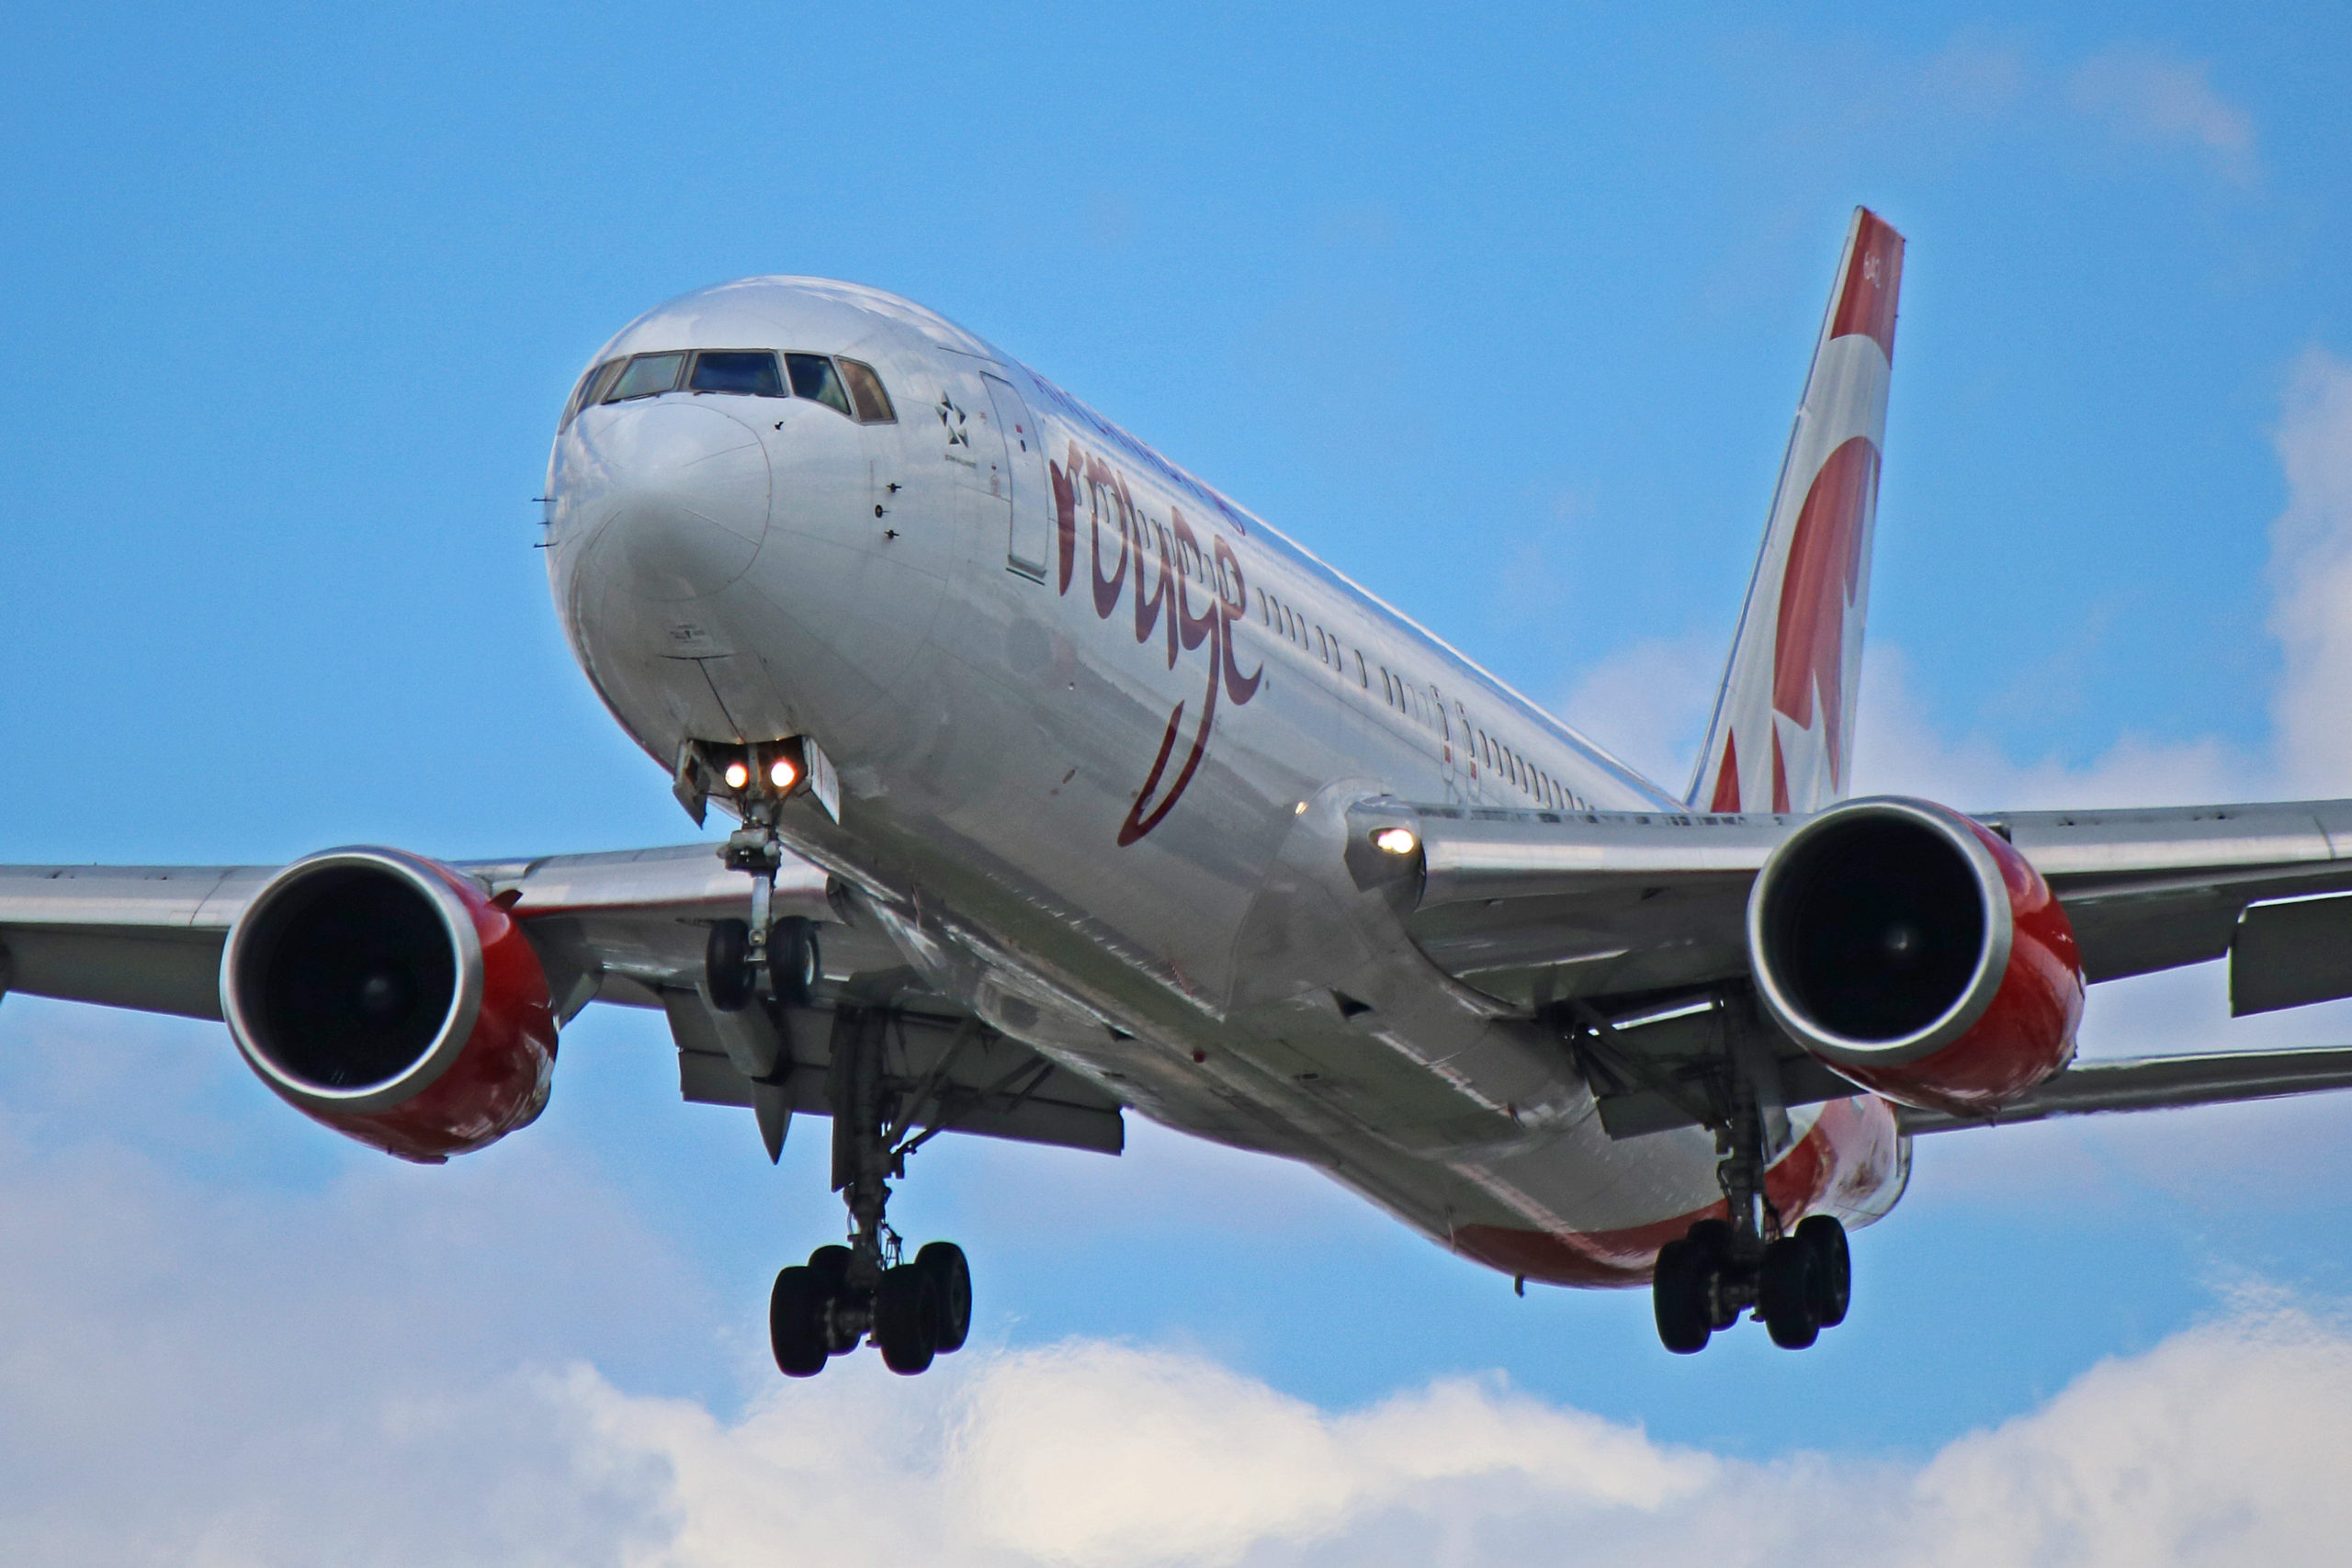 C Gsca Air Canada Rouge Boeing 767 300er Engine Troubles In 2019